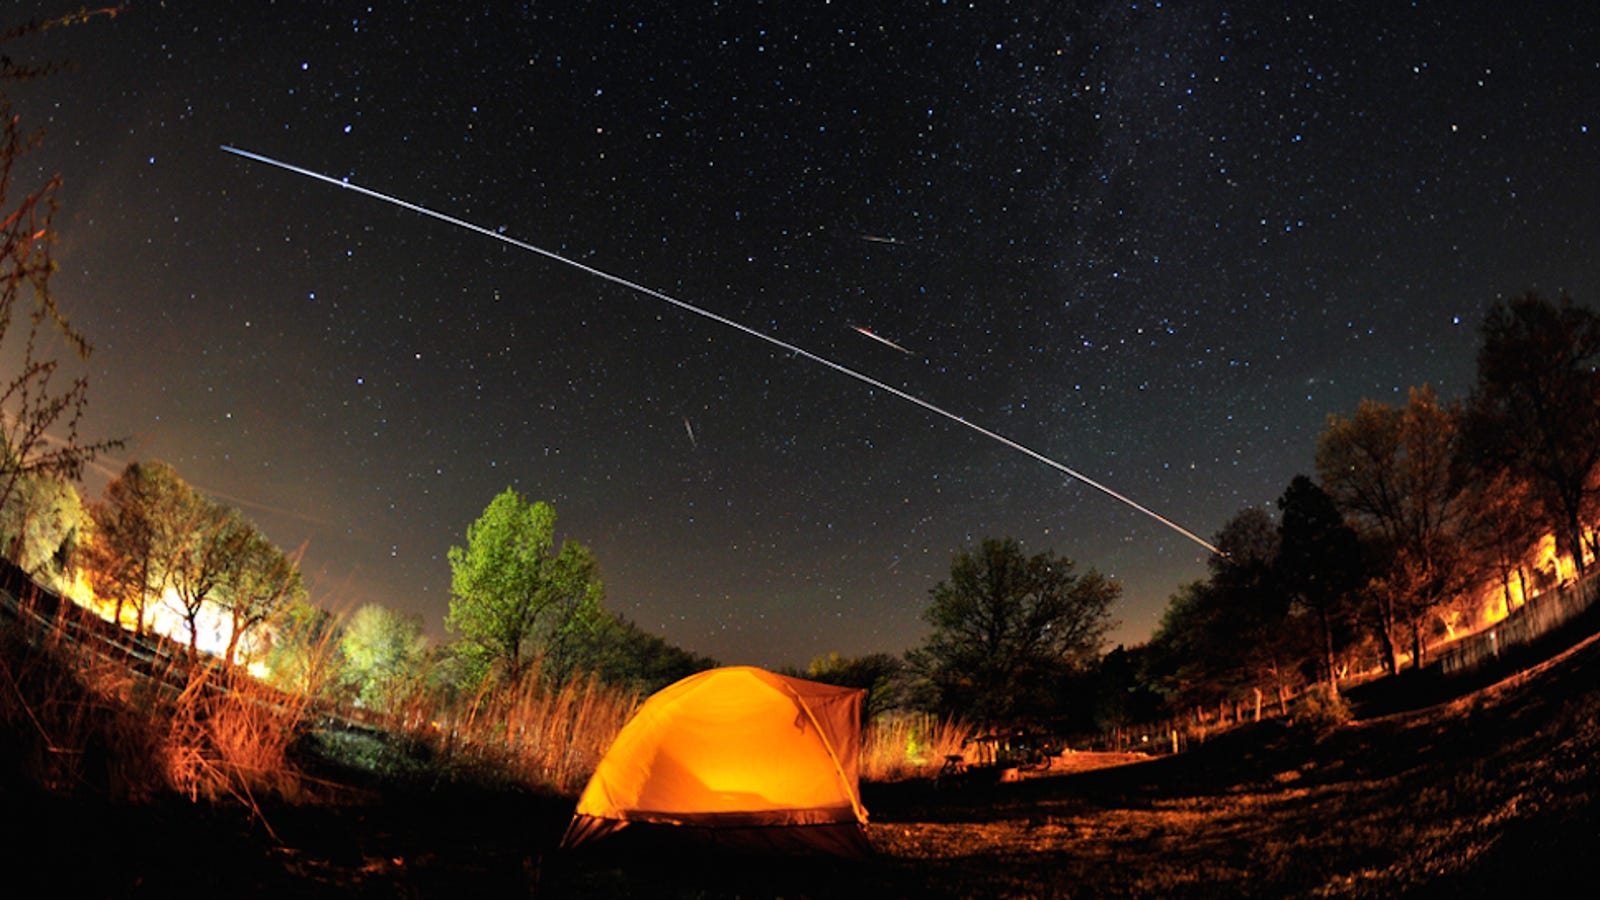 Share Your Photos of This Weekend's Never-Before-Seen Meteor Shower